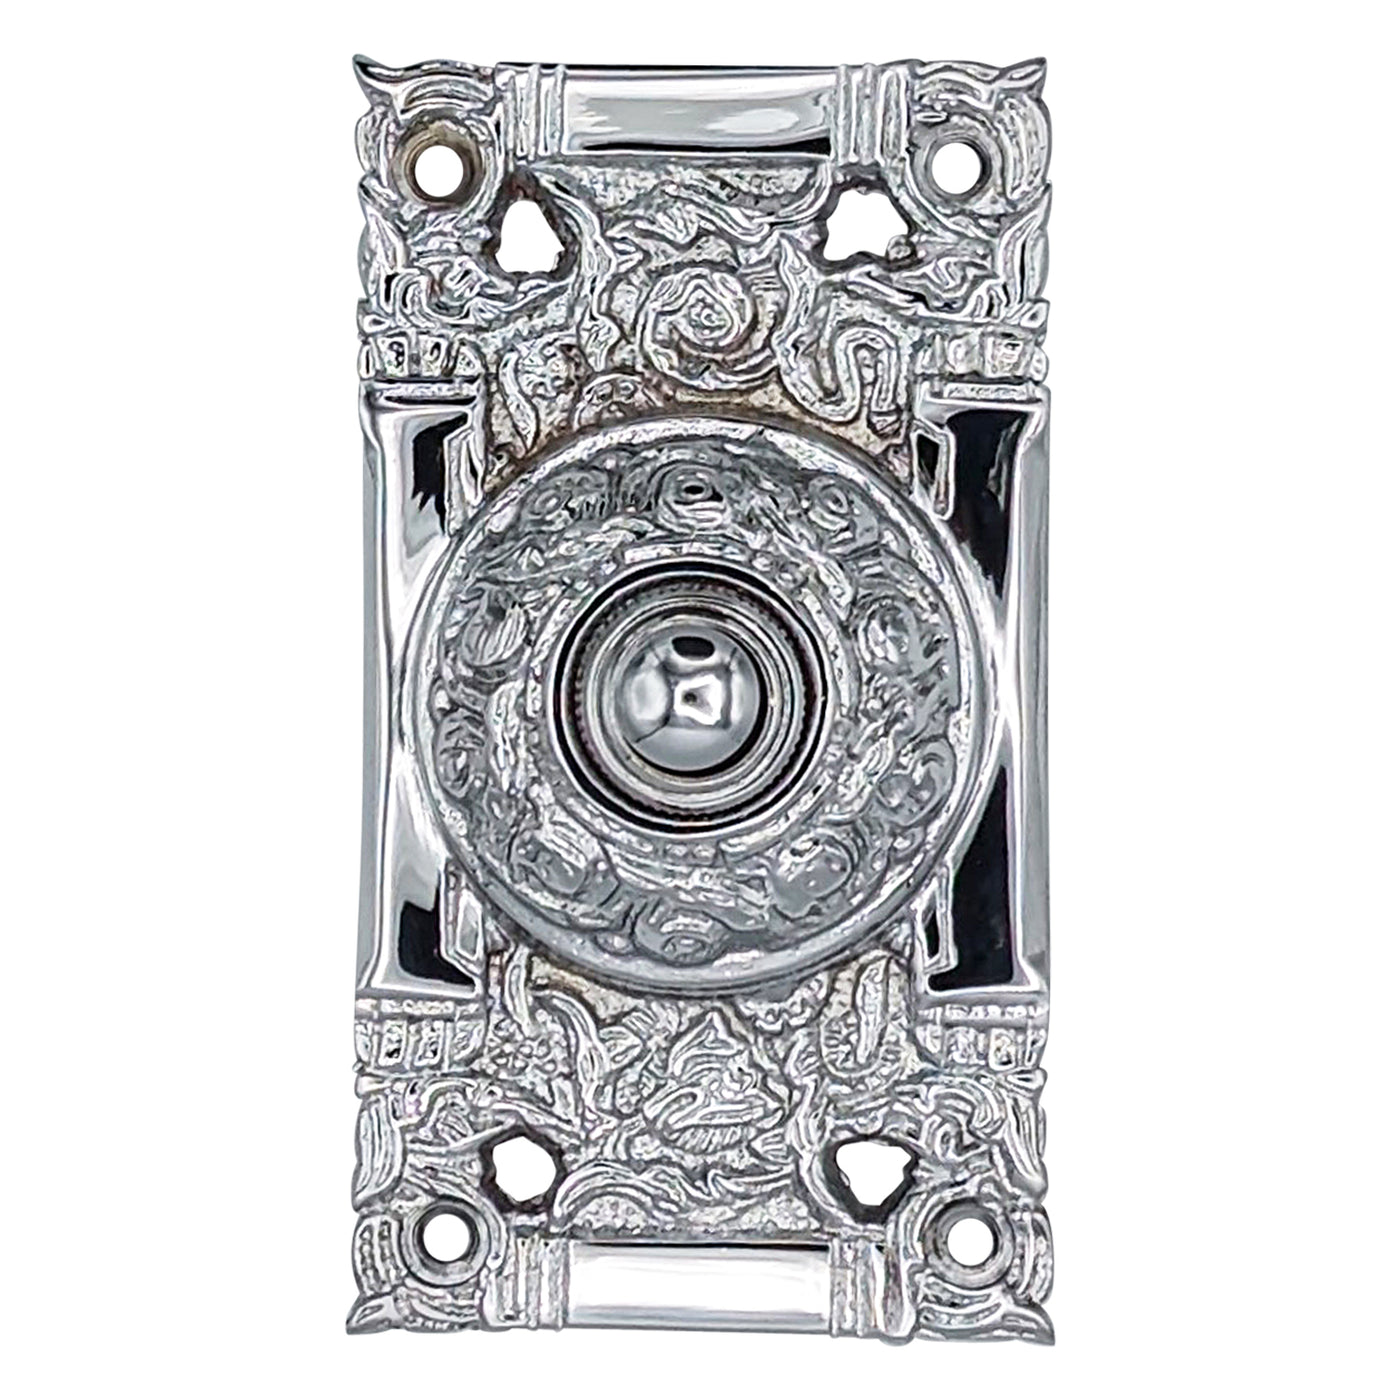 4 1/4 Inch Art Nouveau Solid Brass Doorbell (Polished Chrome Finish)